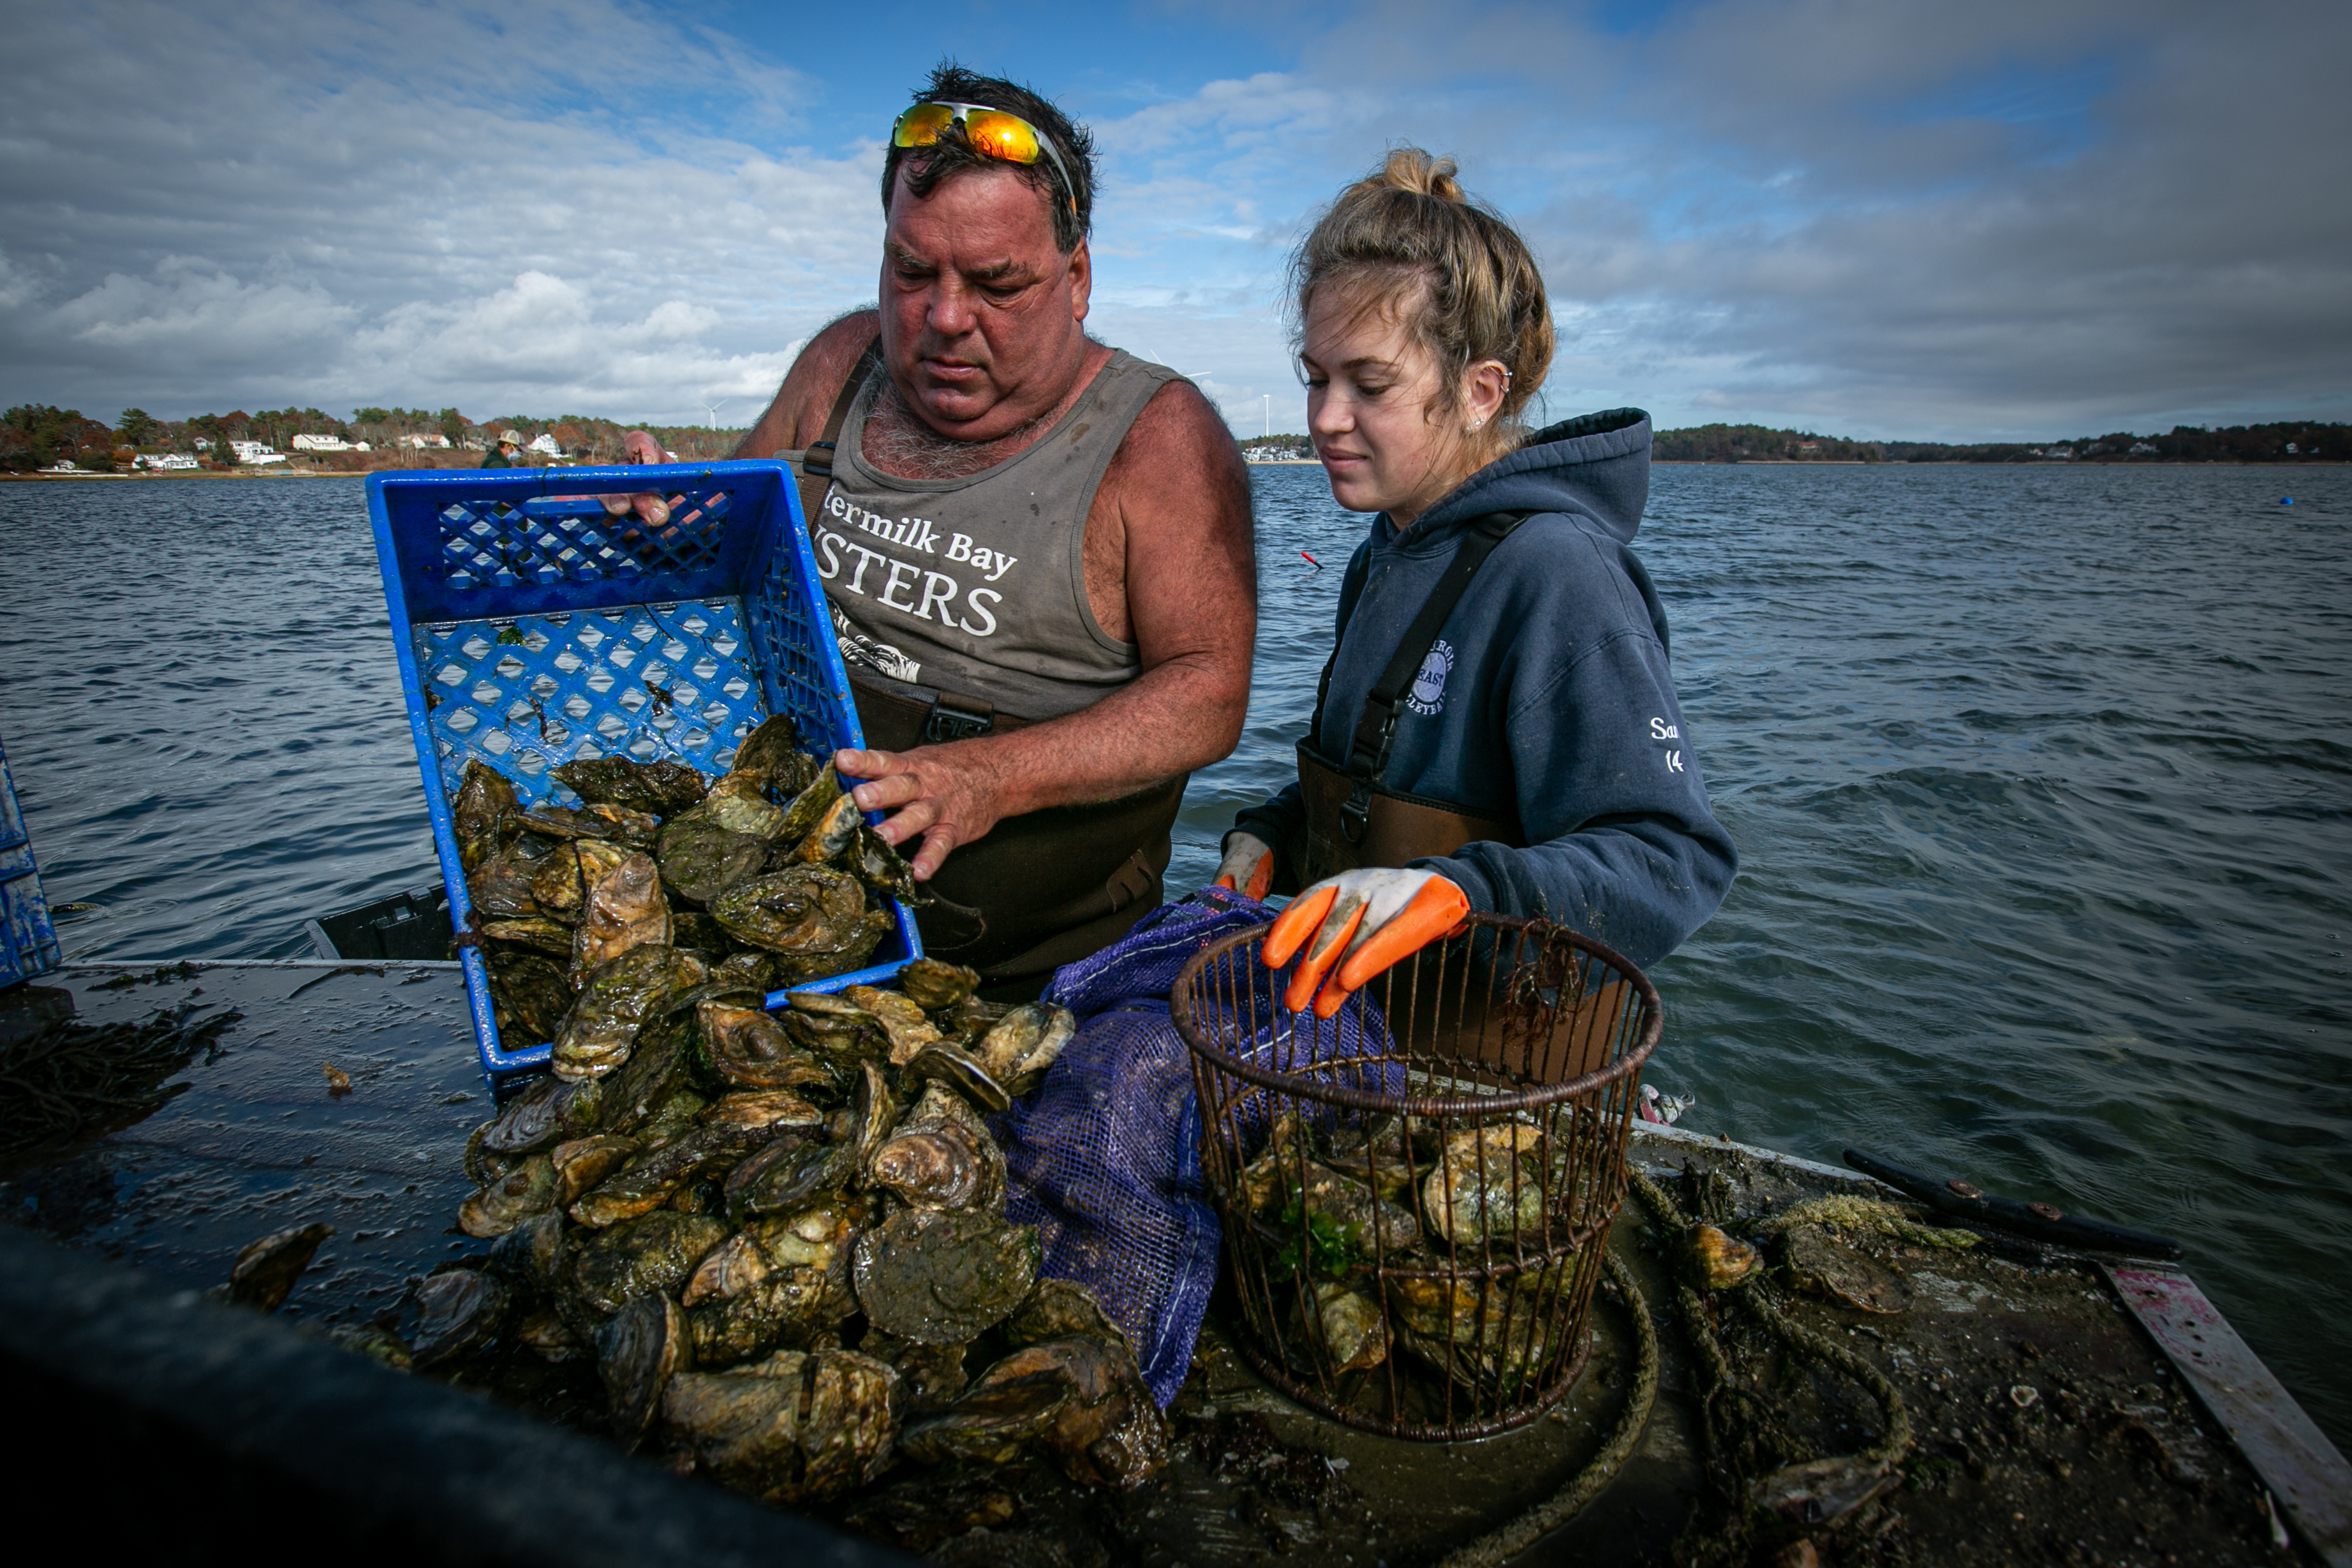 Two people stand in water with oysters in bins.